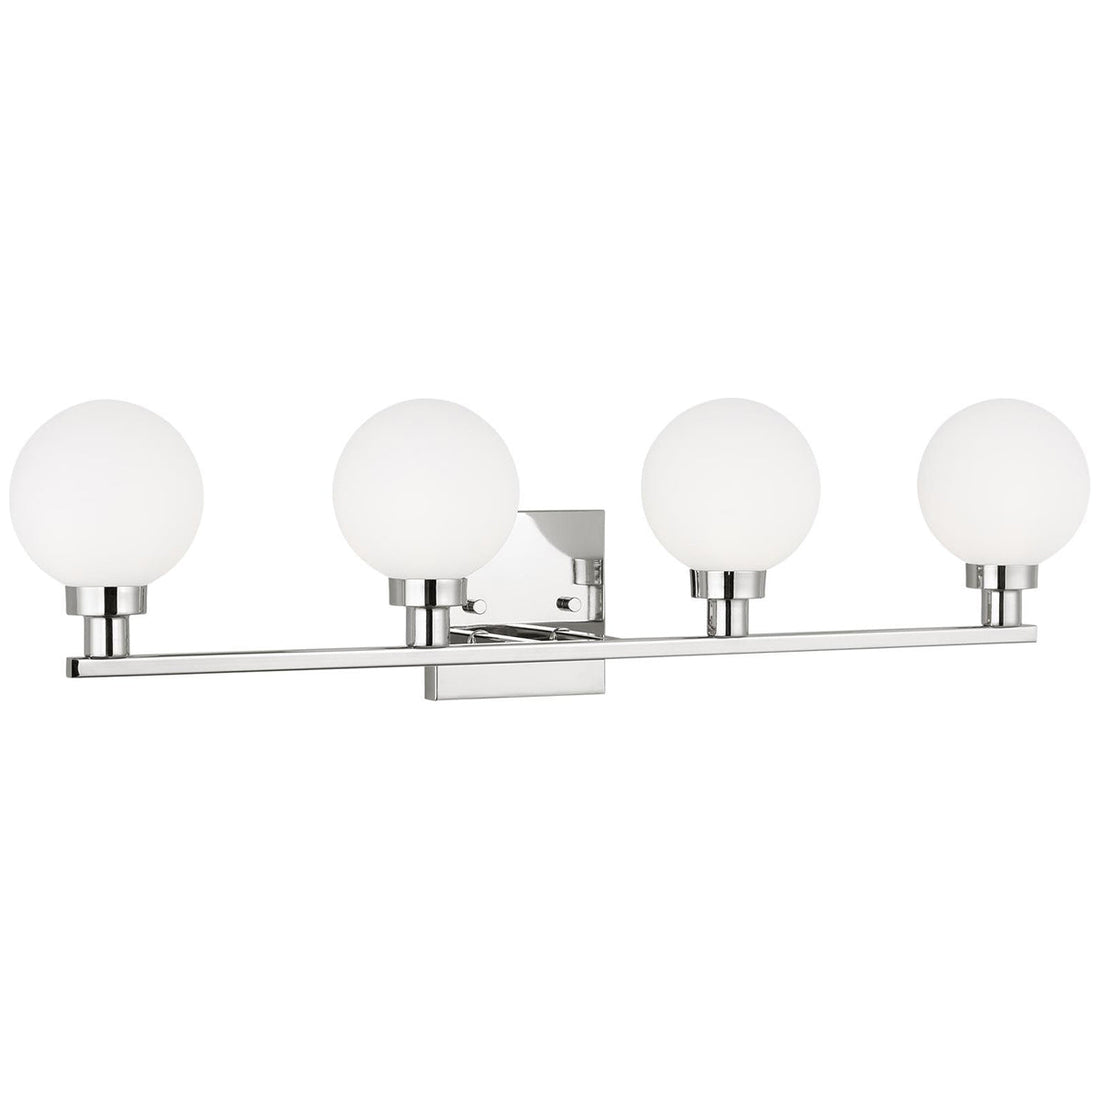 Sea Gull Lighting Clybourn 4-Light Wall/Bath Sconce without Bulb